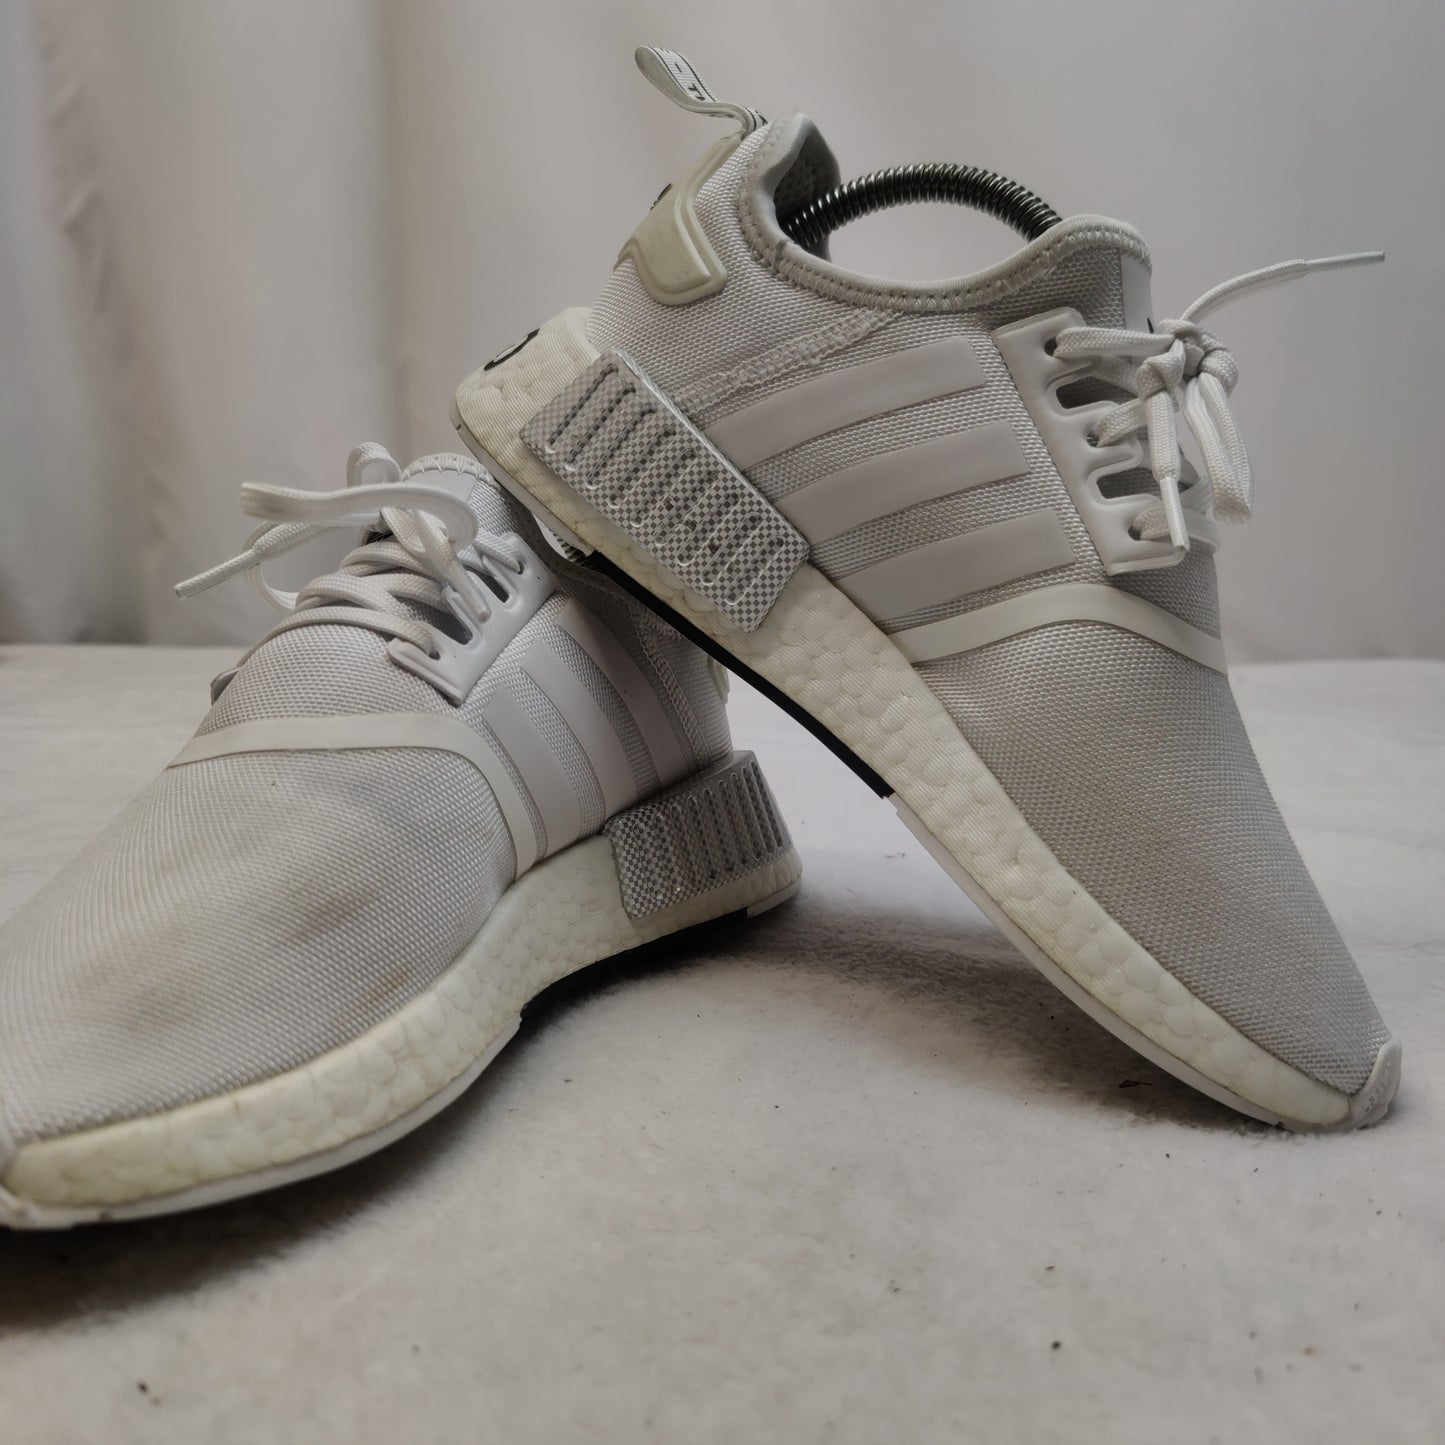 Adidas NMD R1 Primeblue Triple White Sneaker Trainers Shoes Women UK 5.5